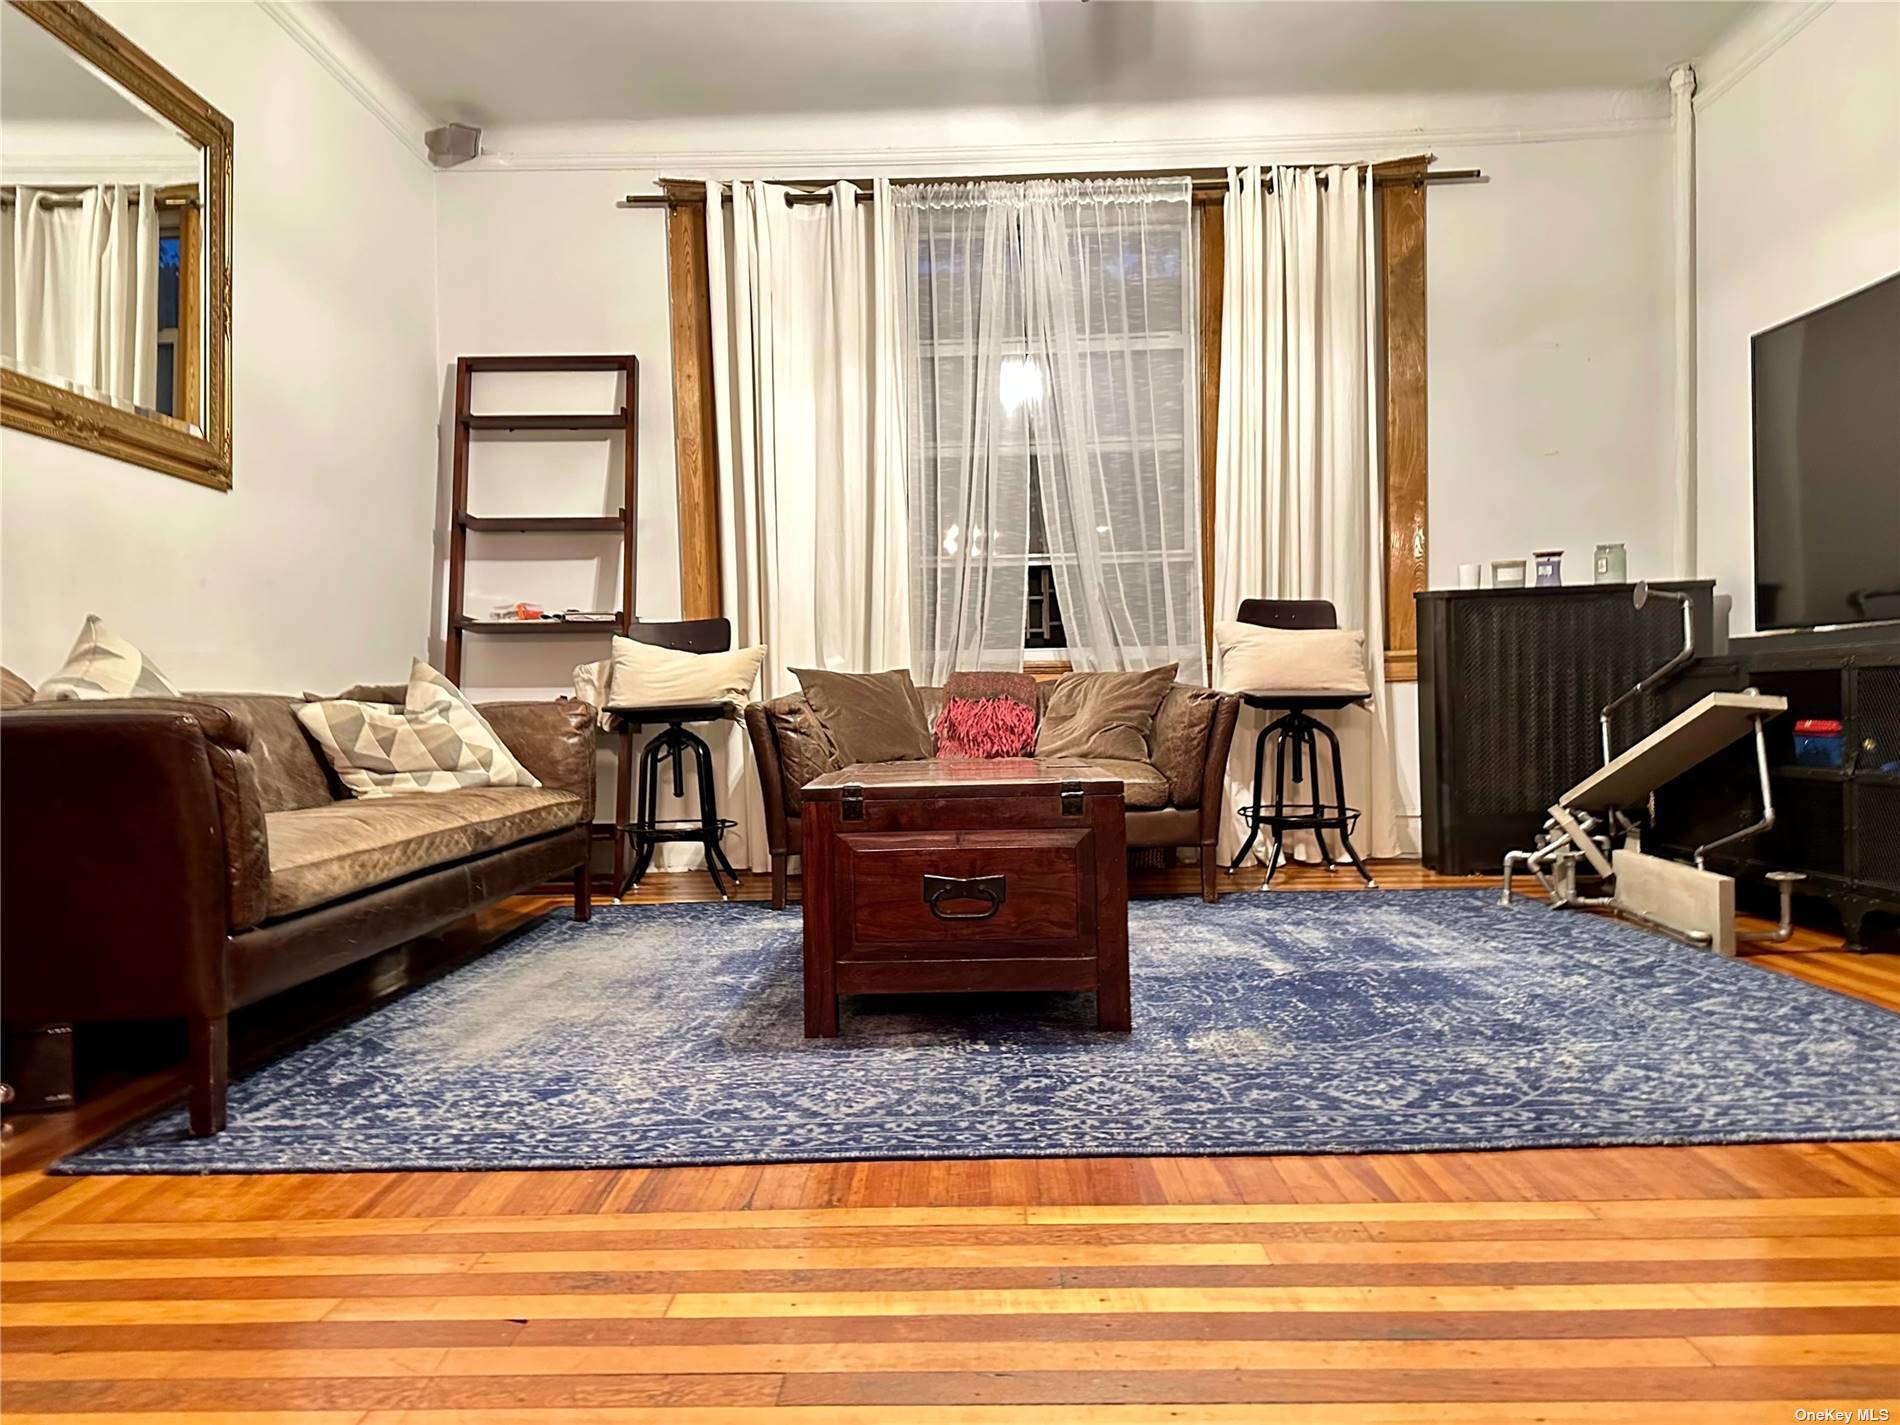 This prewar two bedroom co op in Jackson Heights is a charming living space with some great features.